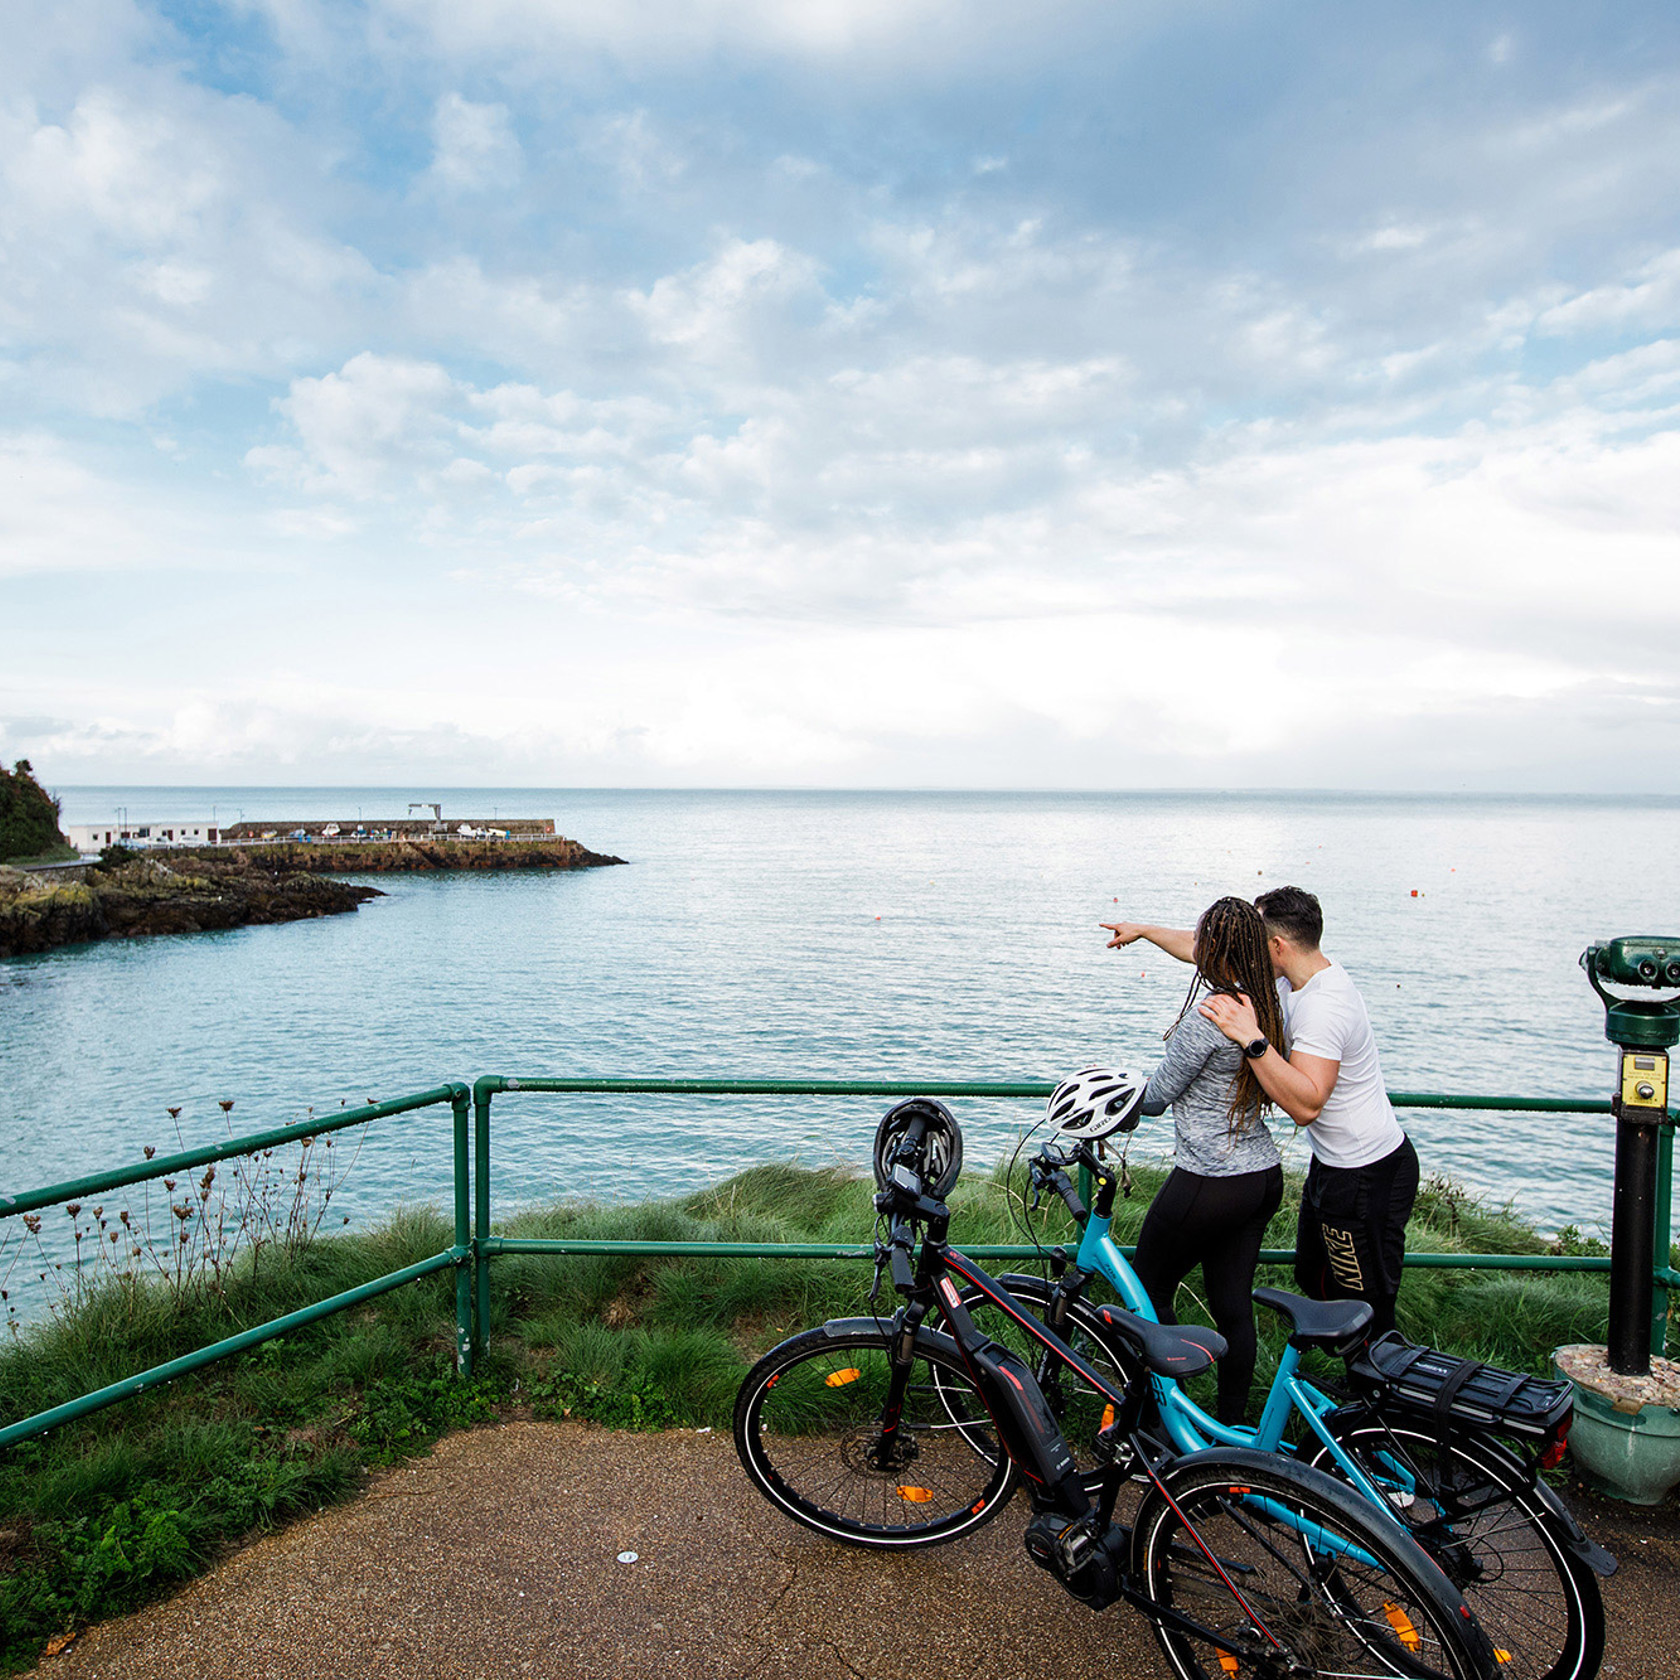  Two cyclists on electric bikes at Bouley Bay.